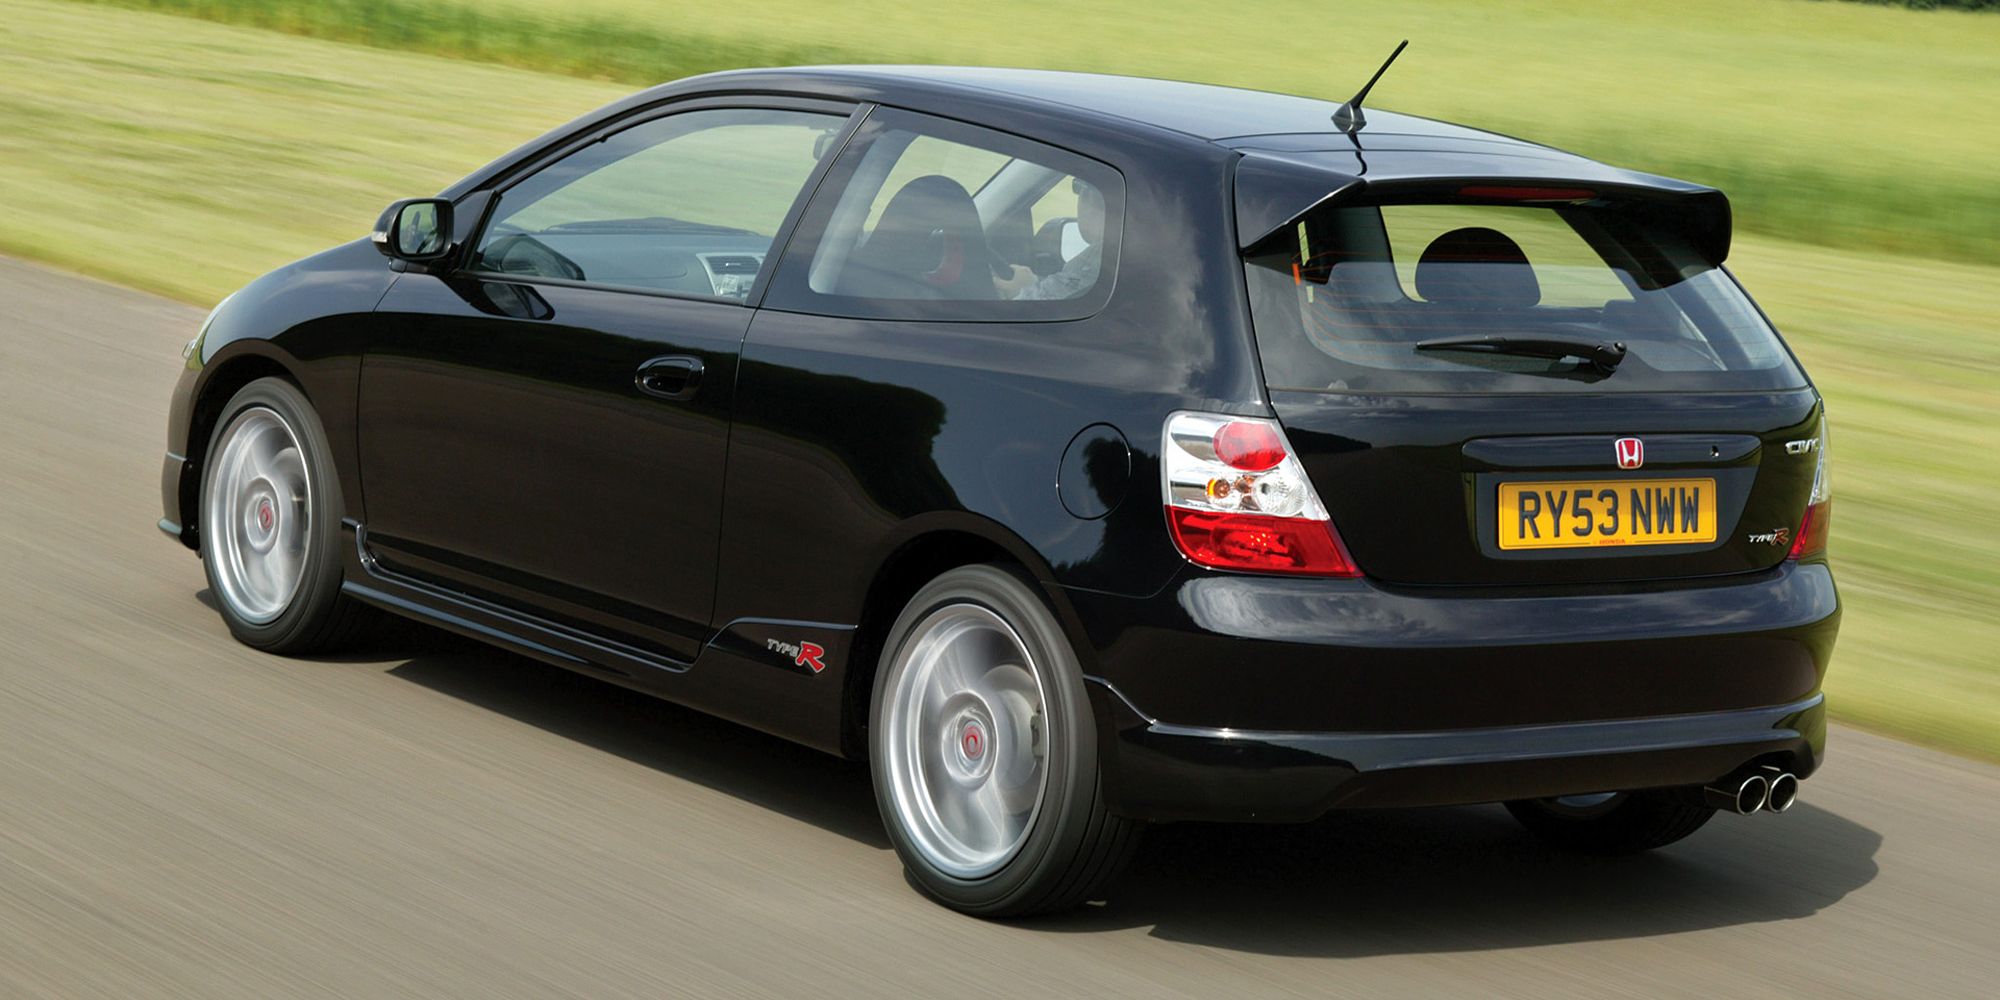 The rear of the EP3 Civic Type R 